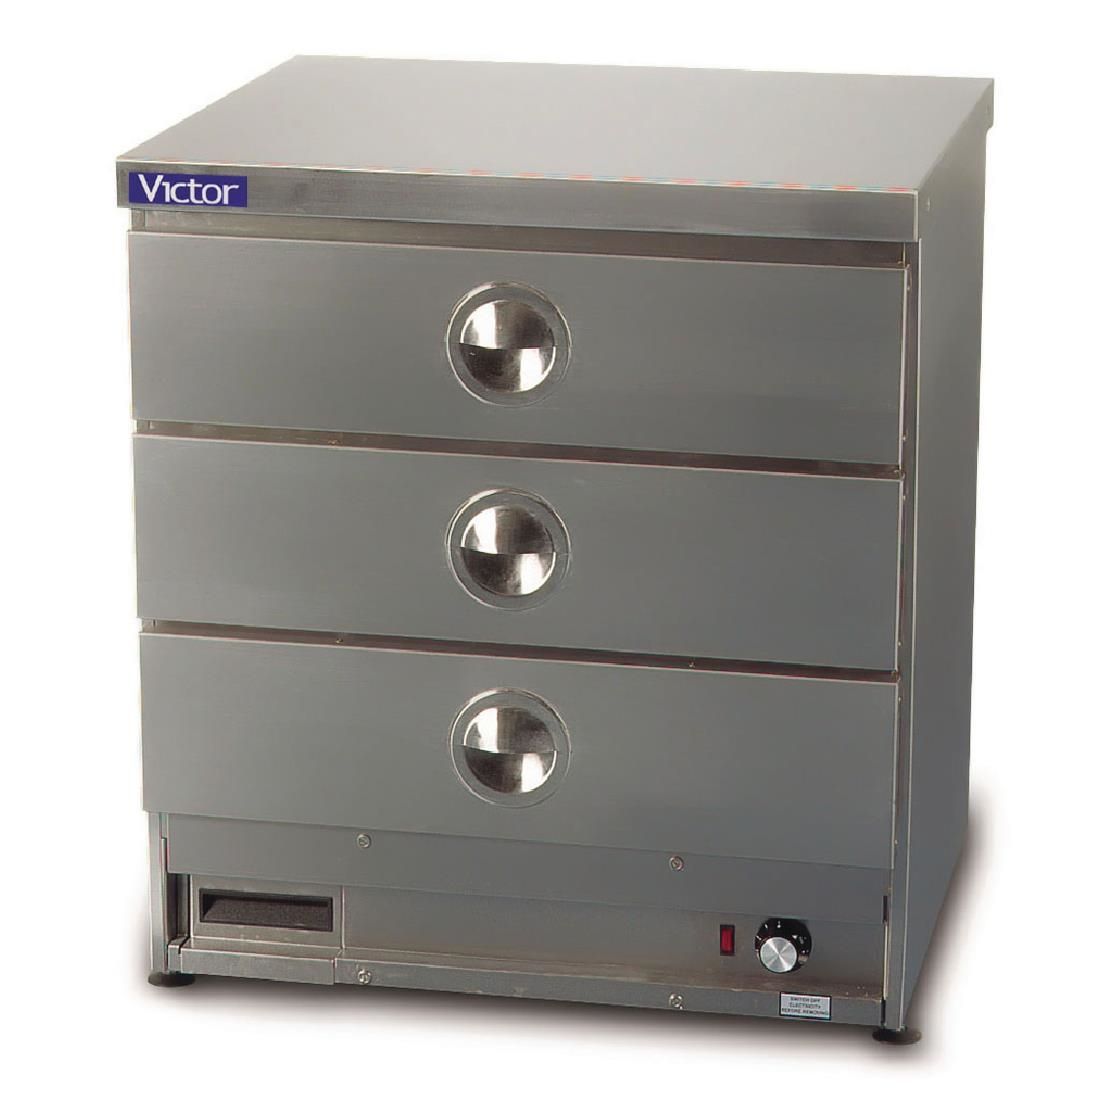 GG558 Victor Sovereign Undercounter Warming Drawer HD75RU JD Catering Equipment Solutions Ltd